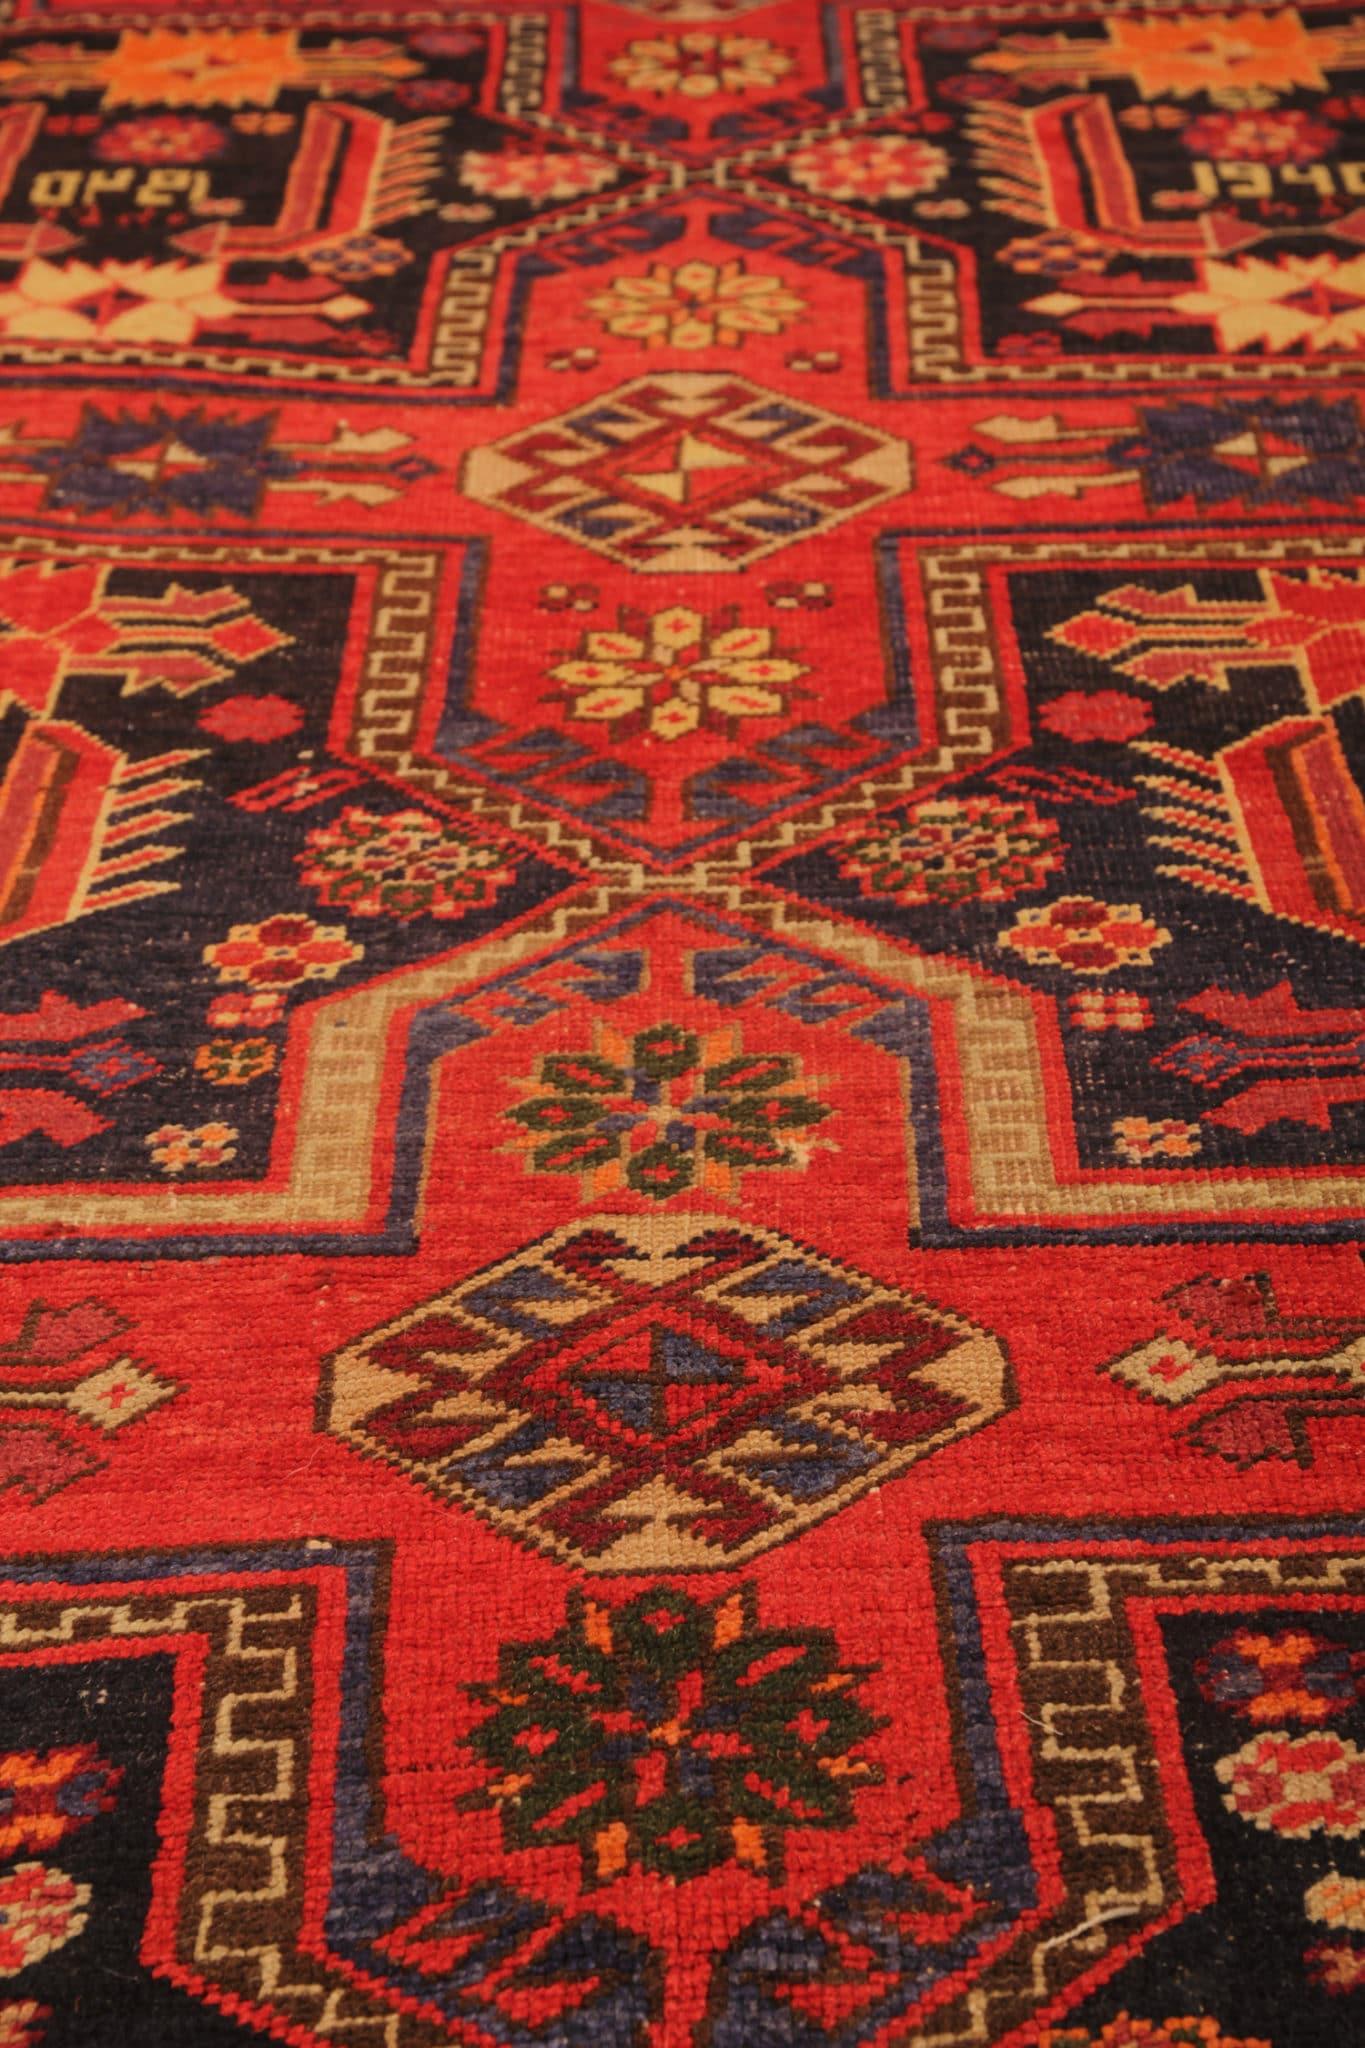 This rare antique rug from the Kazak area is a true treasure for collectors and enthusiasts alike. Handmade with meticulous care, its exquisite craftsmanship showcases the rich heritage of Caucasian weaving traditions. Dating back to the 1950s, this